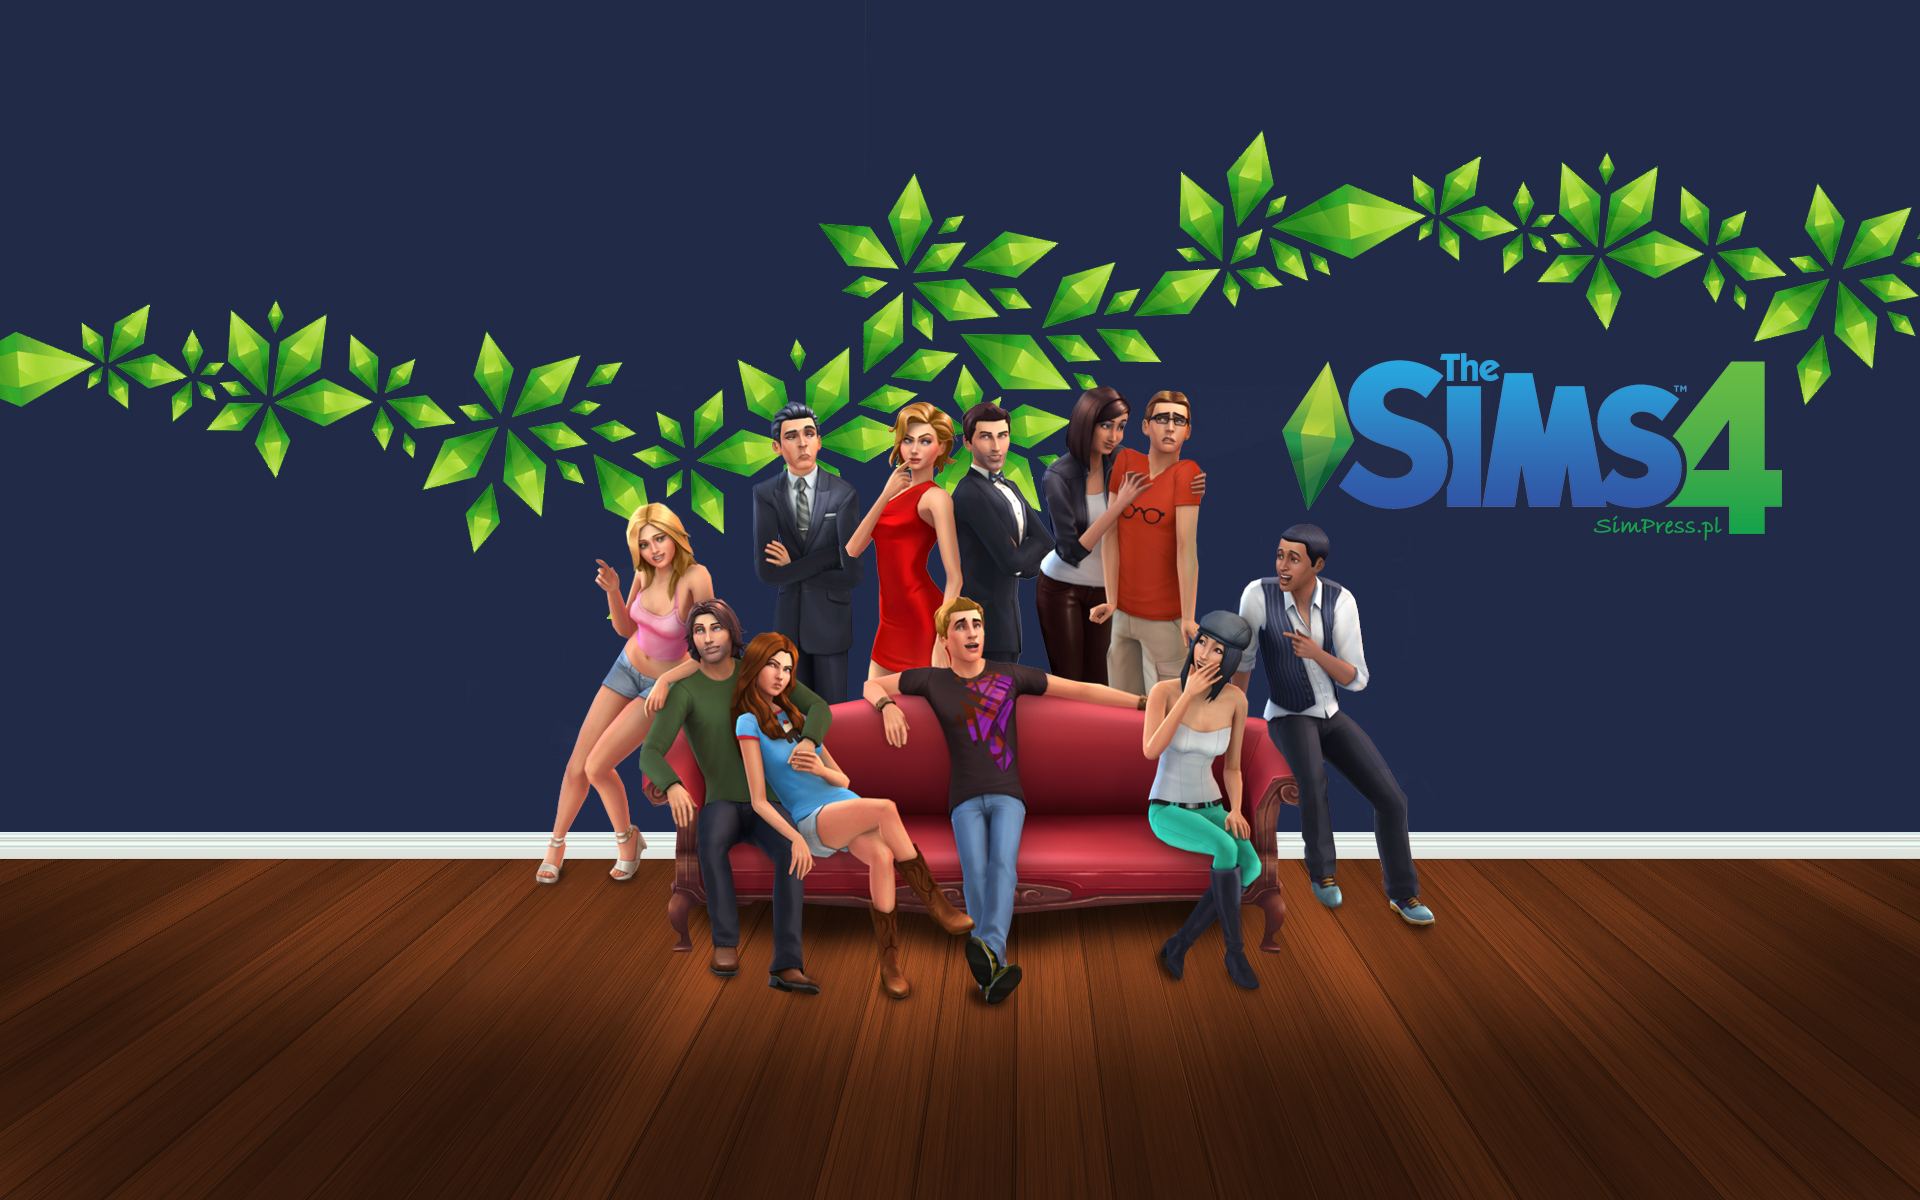 Free Download The Sims 4 Games Wallpaper High Resolution Pho 2951